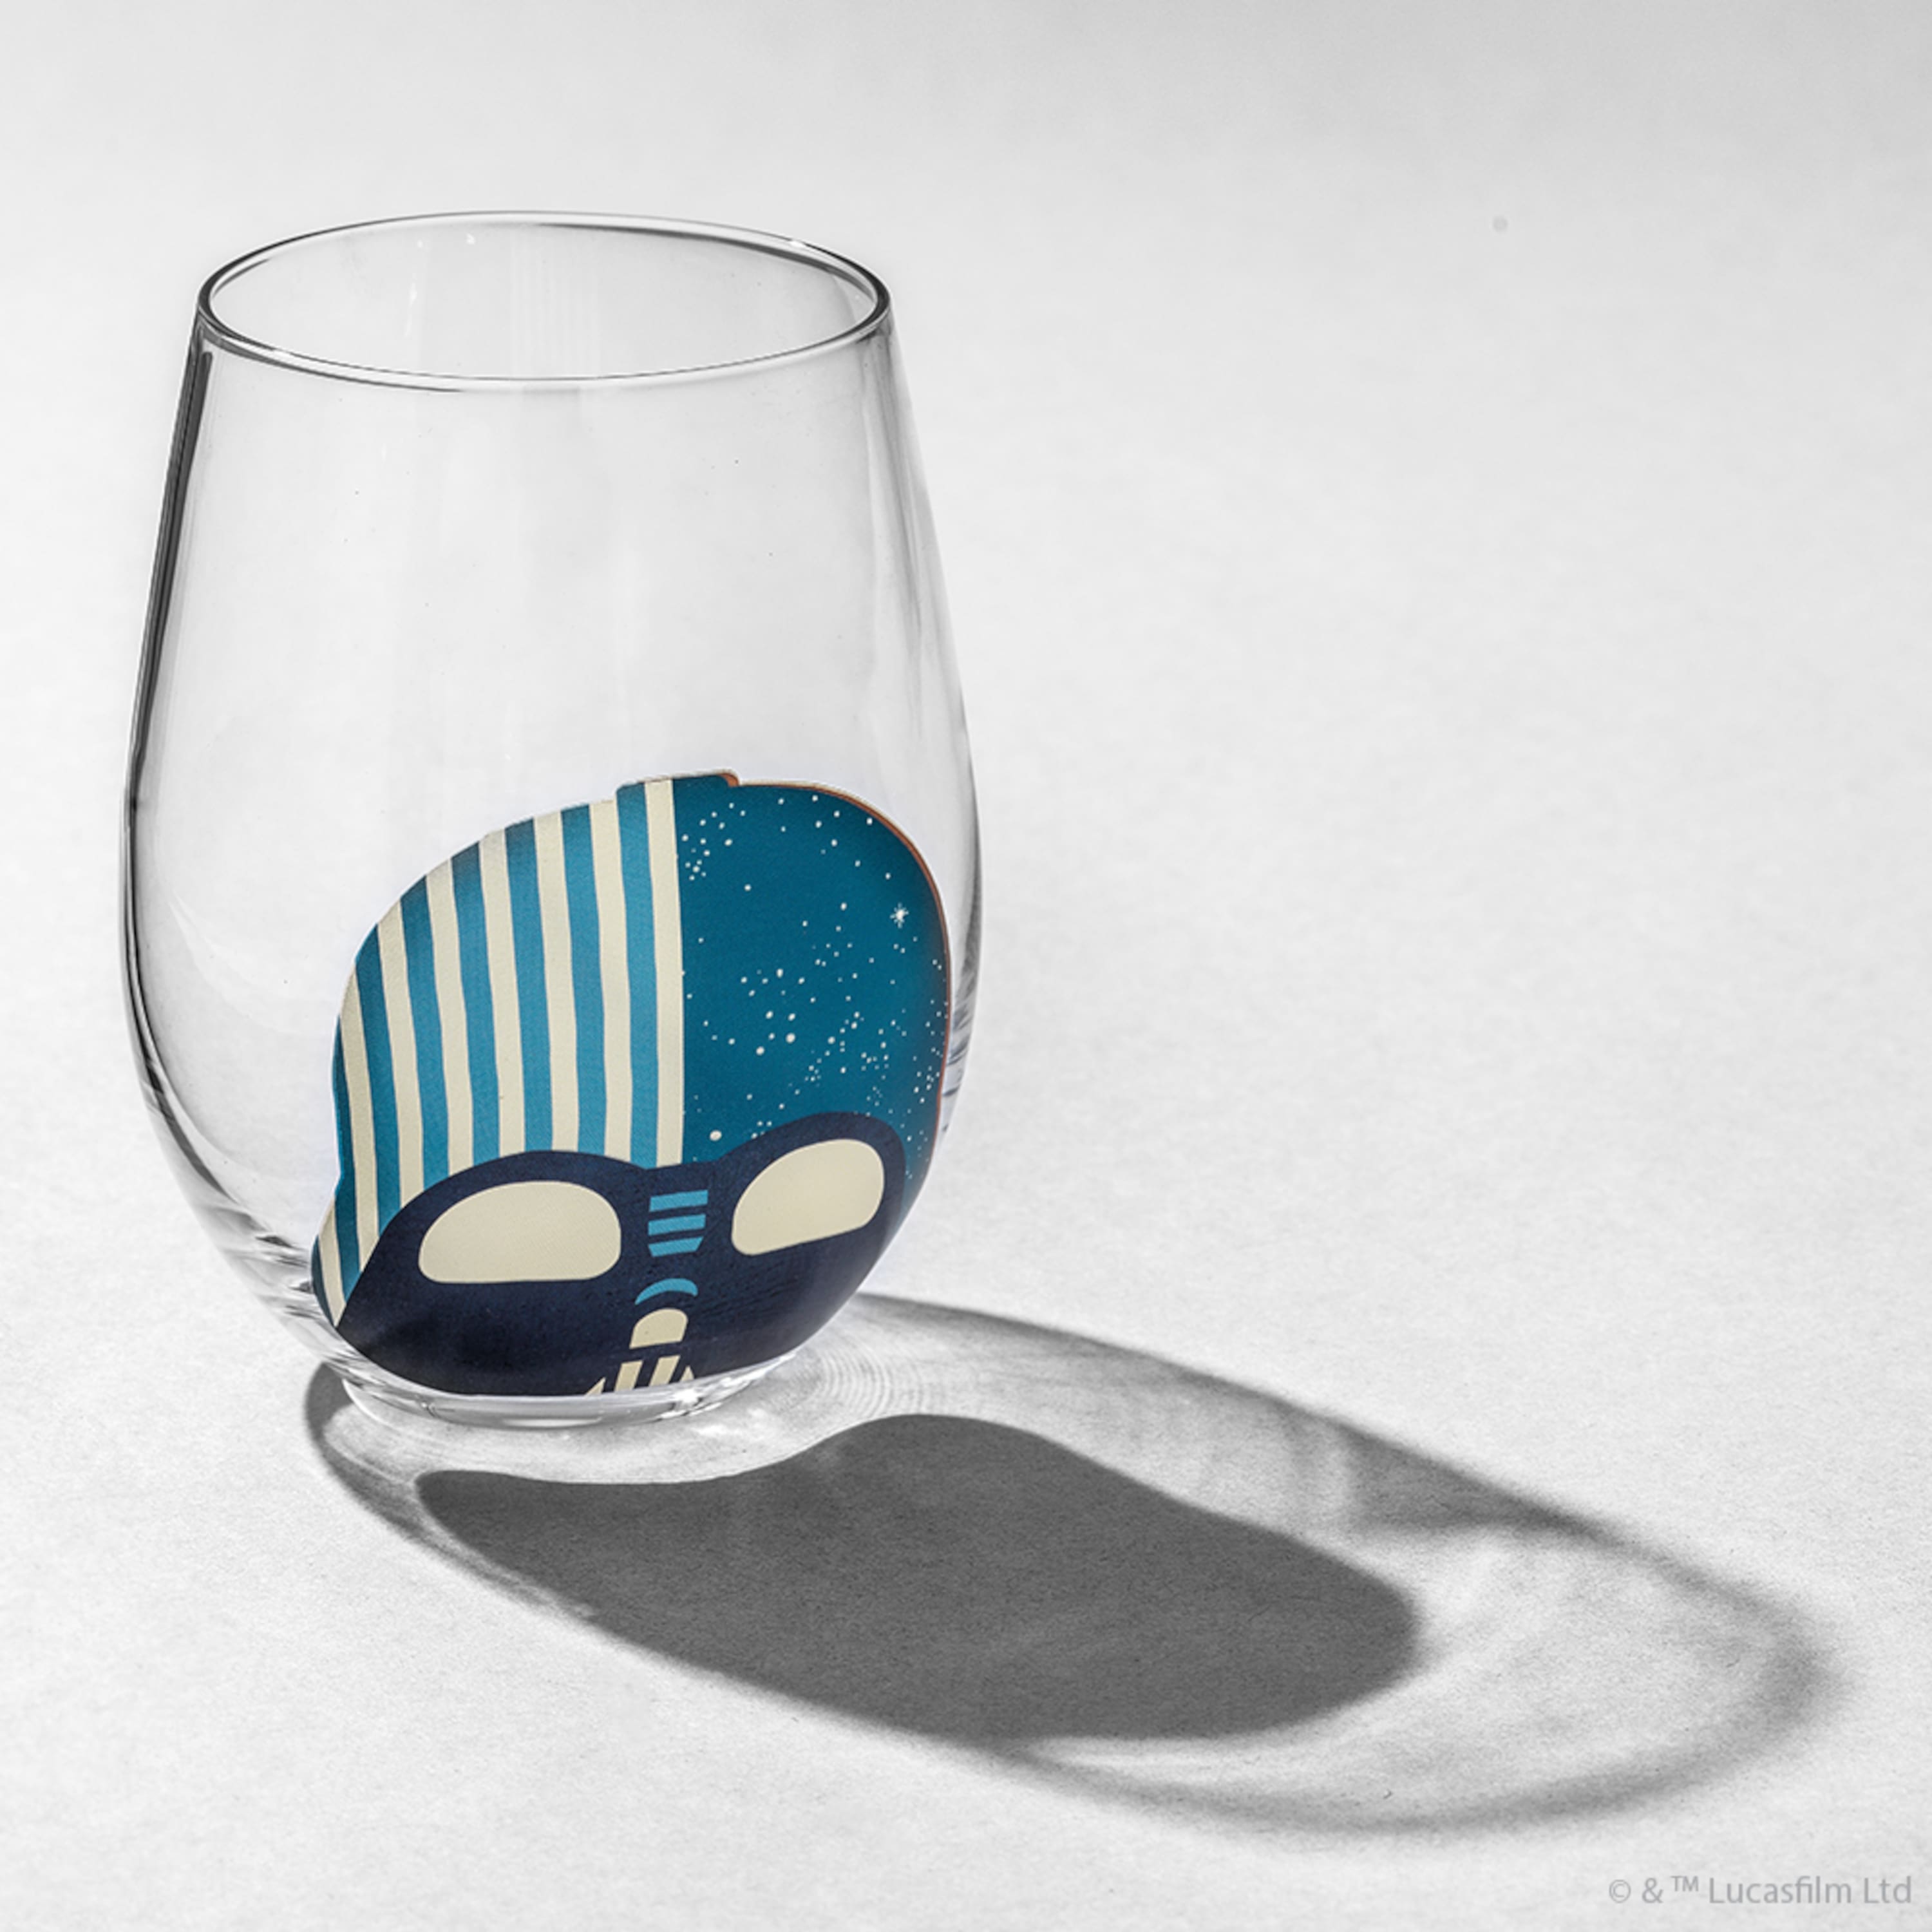 This is the Way Star Wars Themed Wine Glass with Mandolorian Bounty Hunter  Din Djarin during the Fallen Galactic Empire 